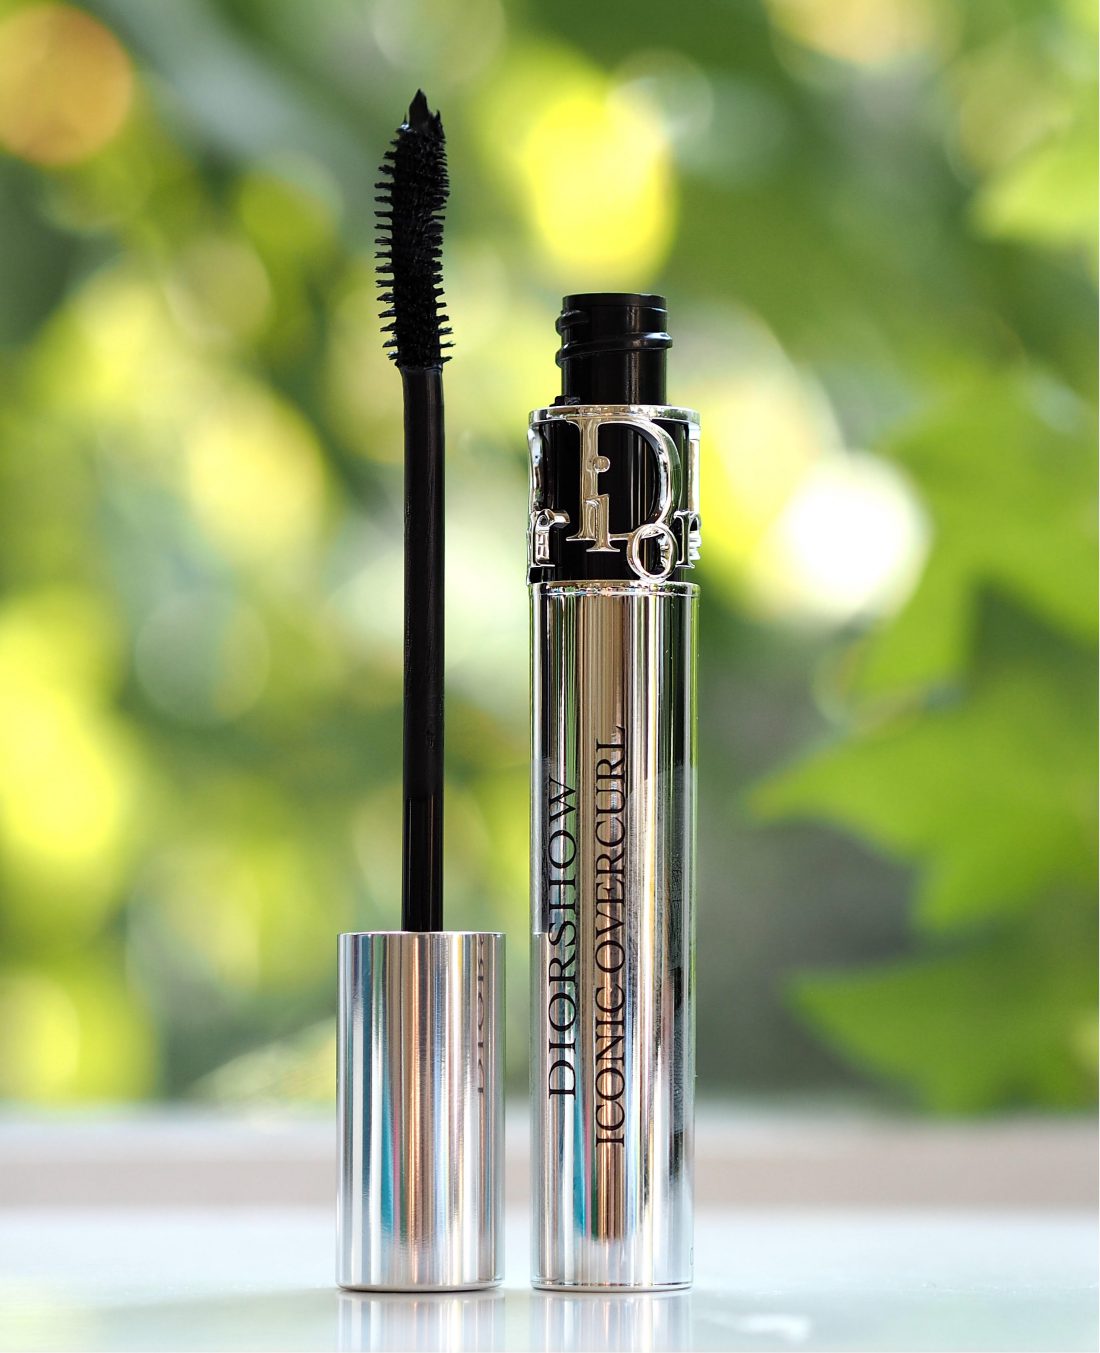 Diorshow Iconic Overcurl Mascara Review | Blogger